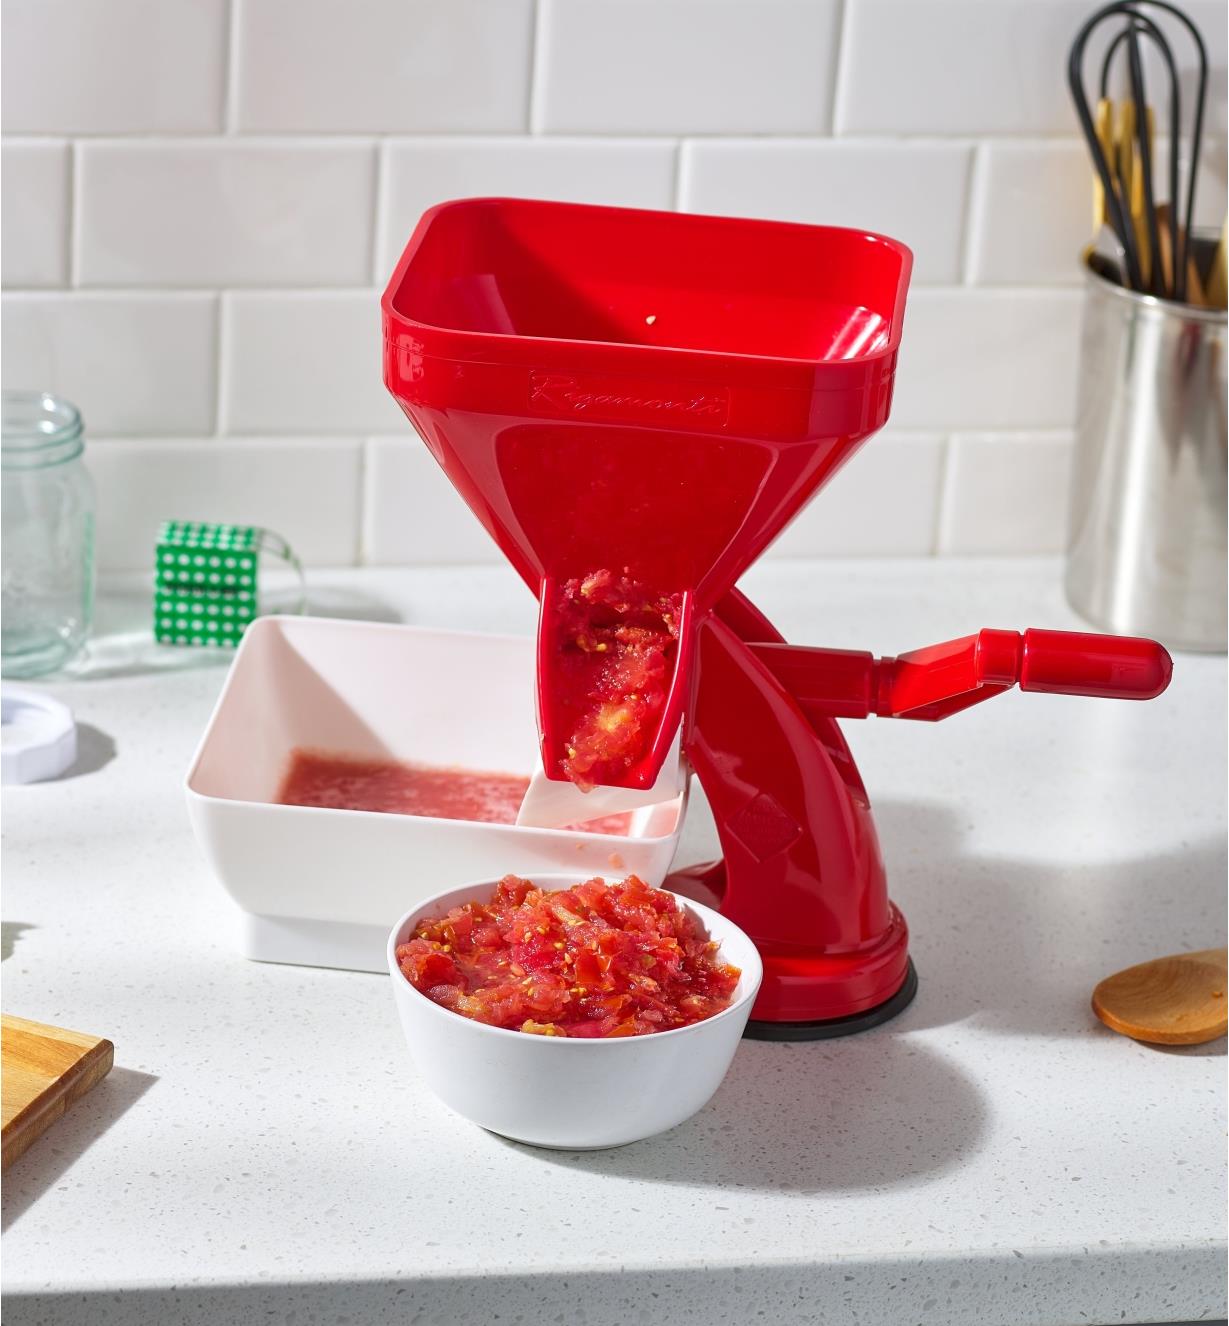 Tomato press sits on a counter with skins and seeds running into a bowl